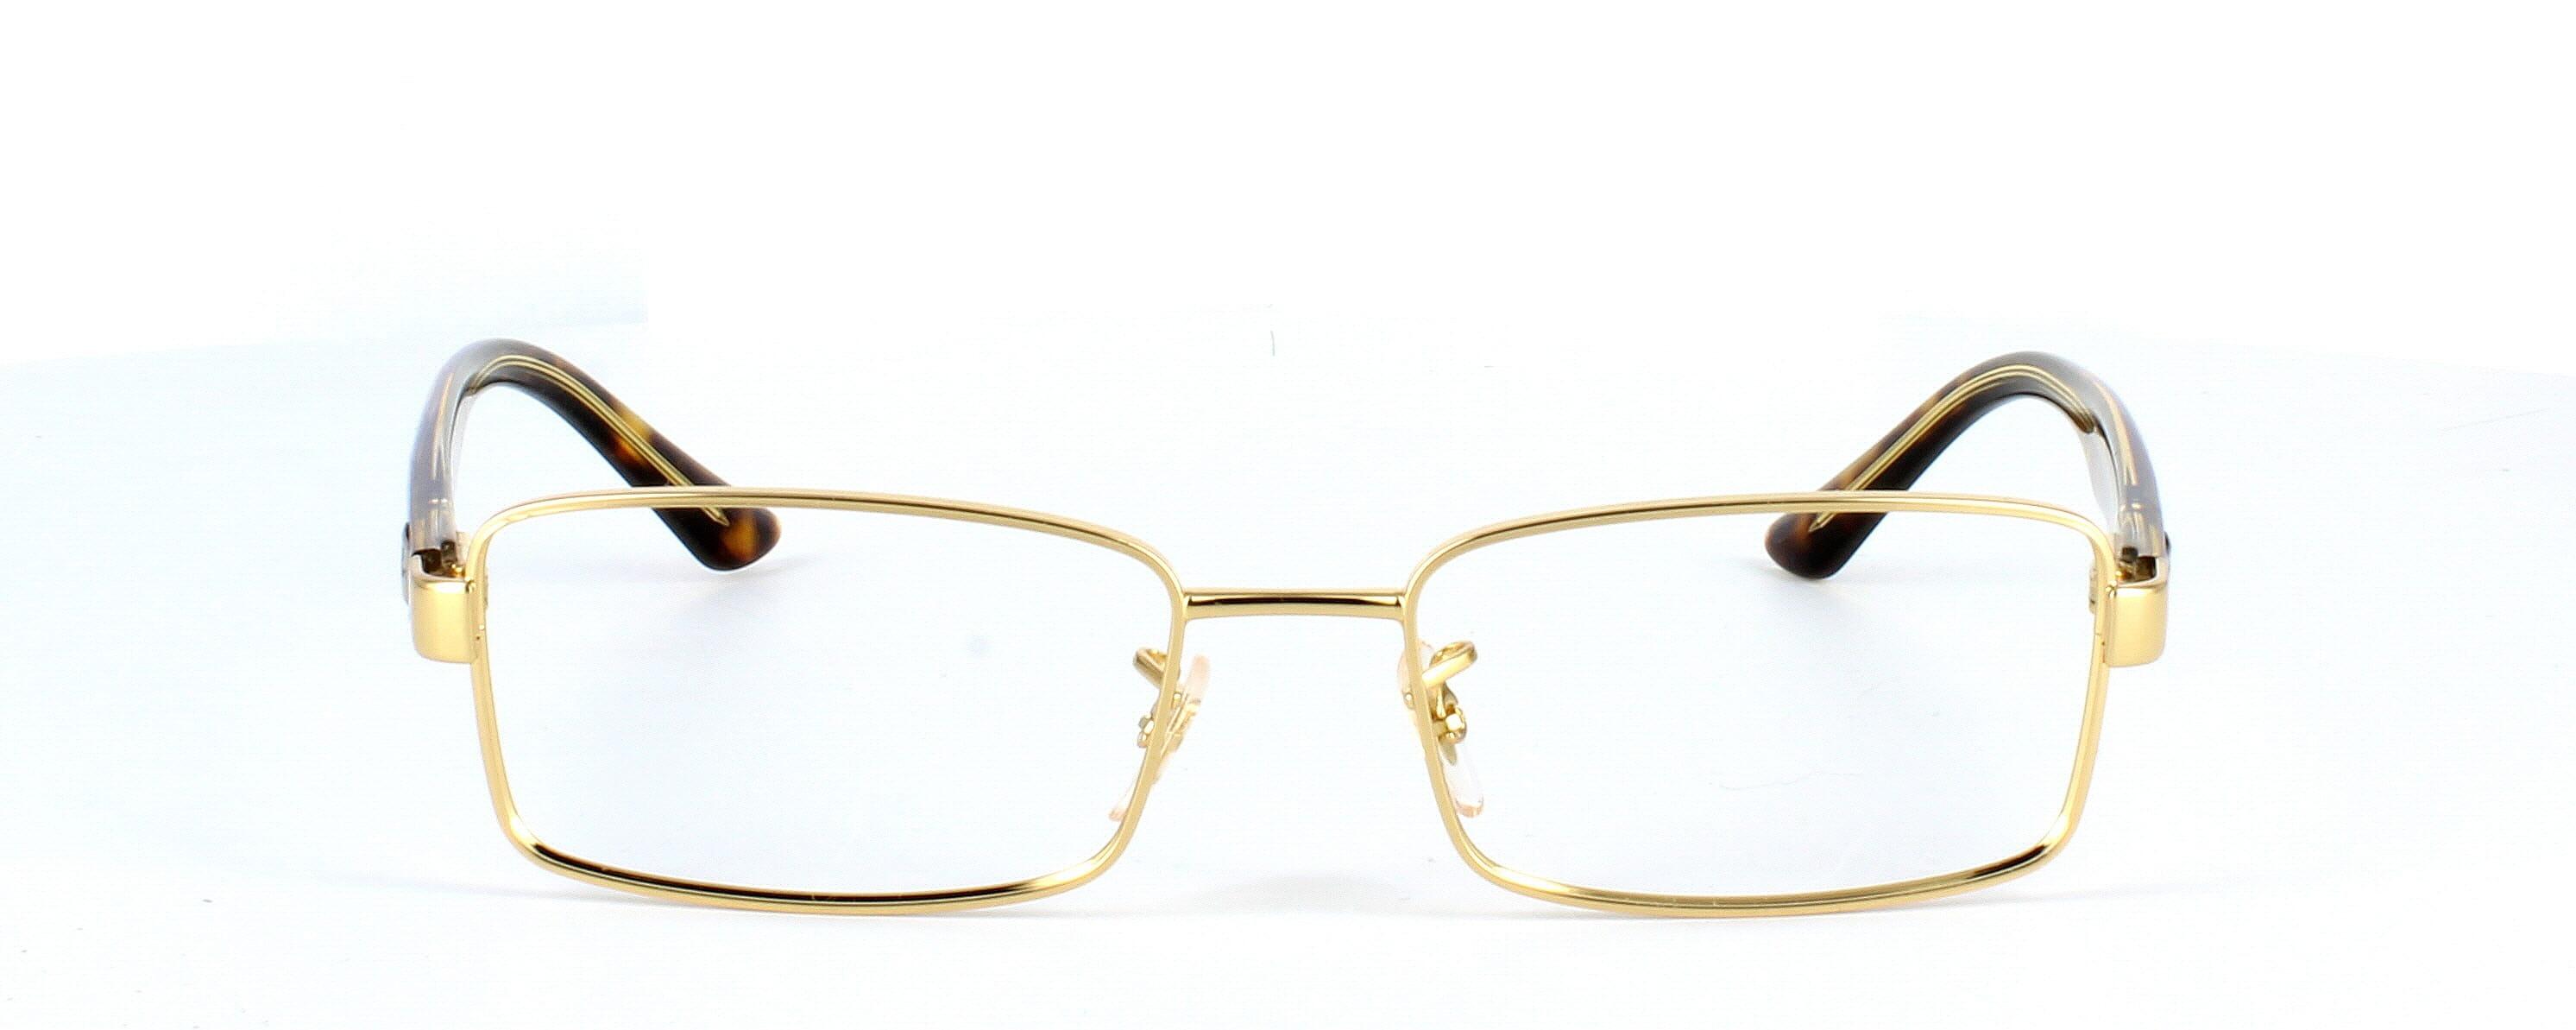 Ray Ban 62701 Gold - Gent's narrow full metal rectangular shaped glasses in gold - image view 2